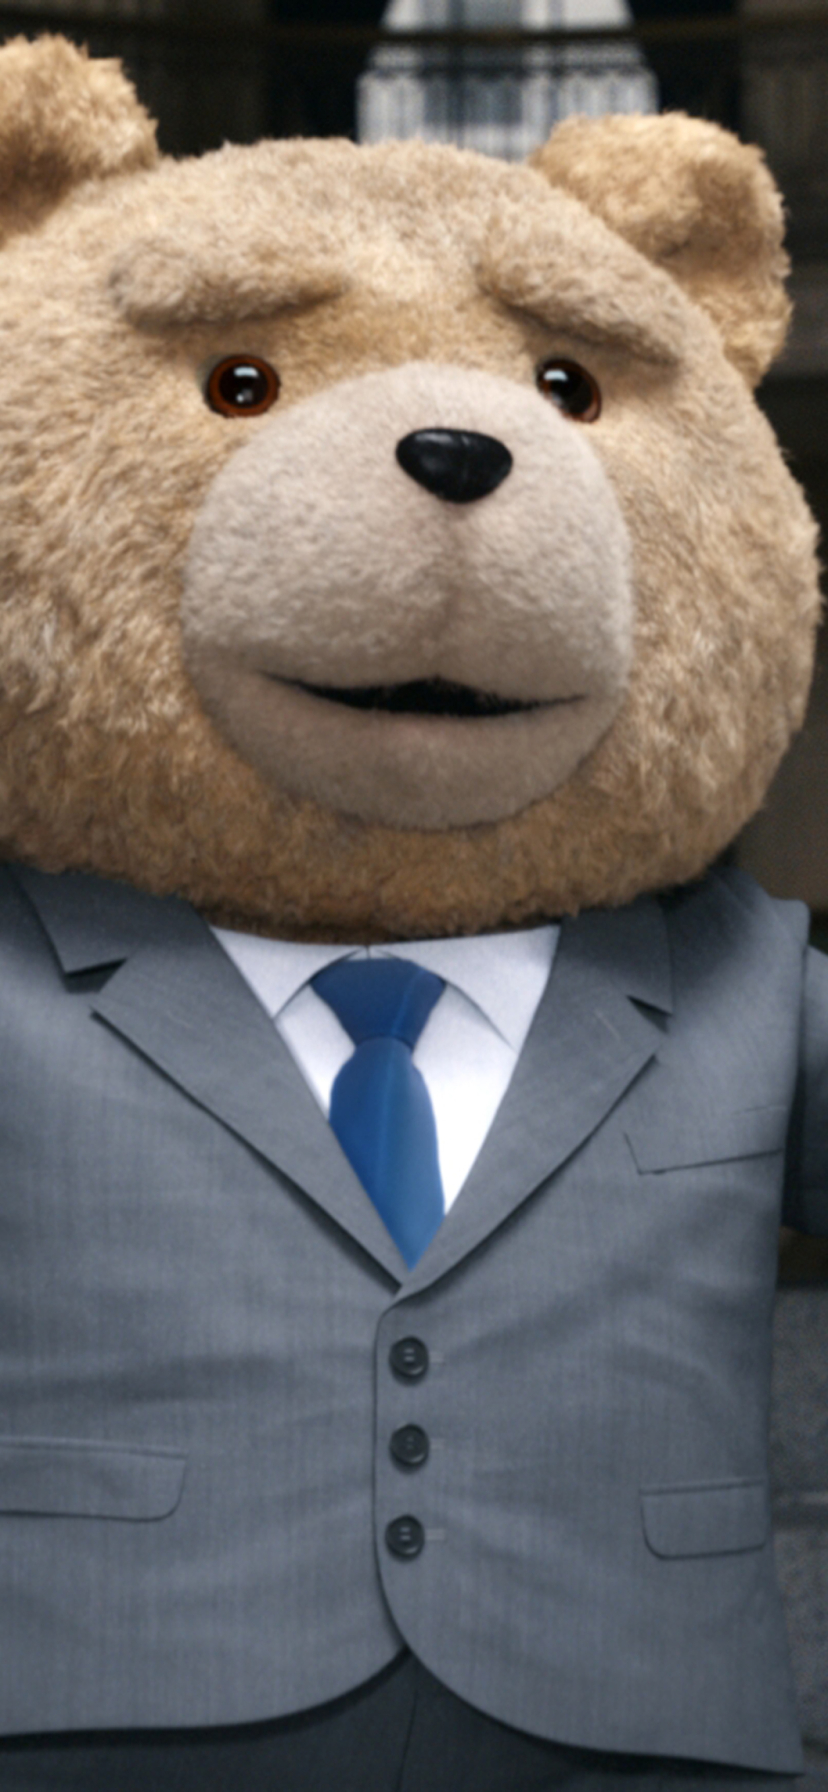 Ted 2 Phone Wallpaper